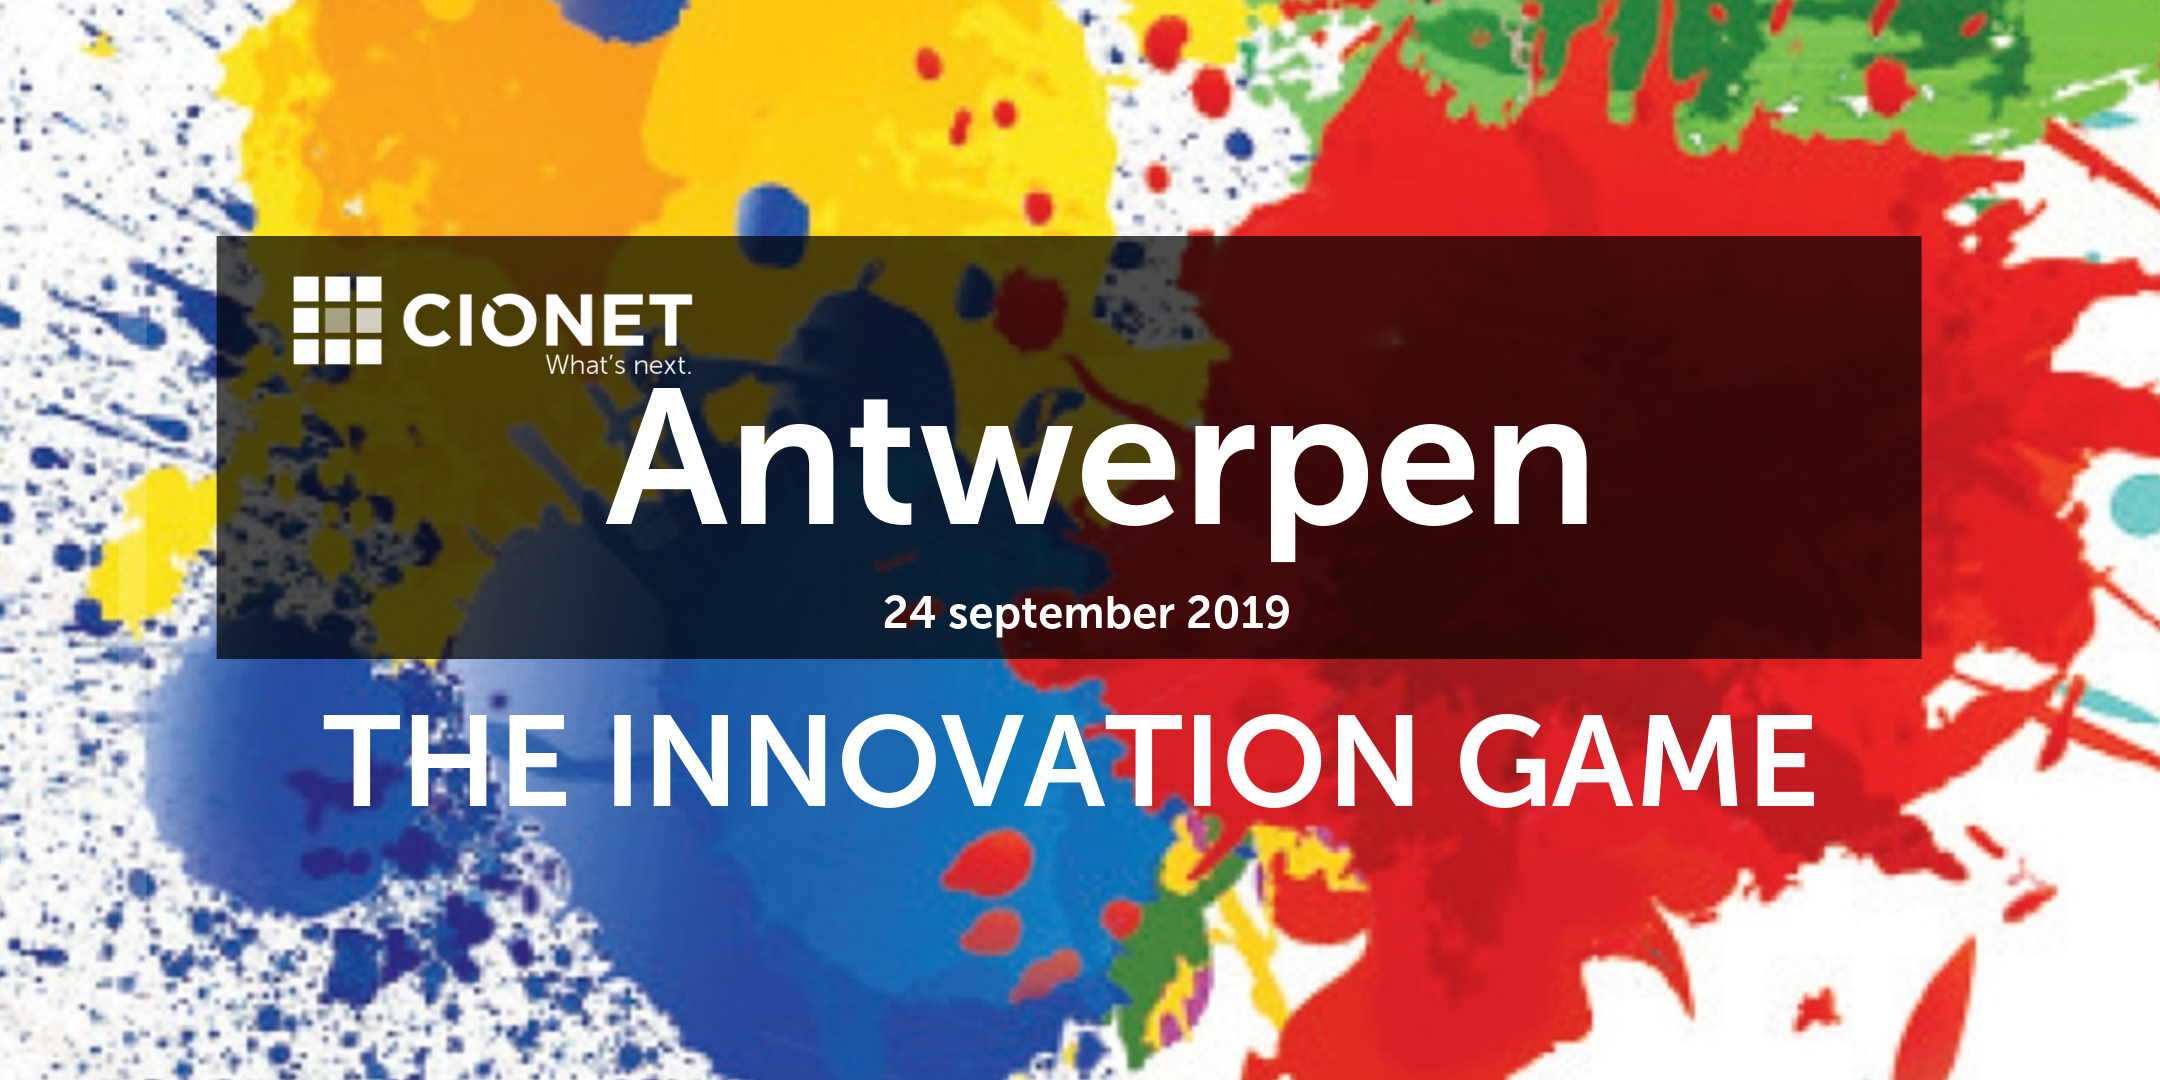 BE20190924 - The Innovation Game - Antwerpen